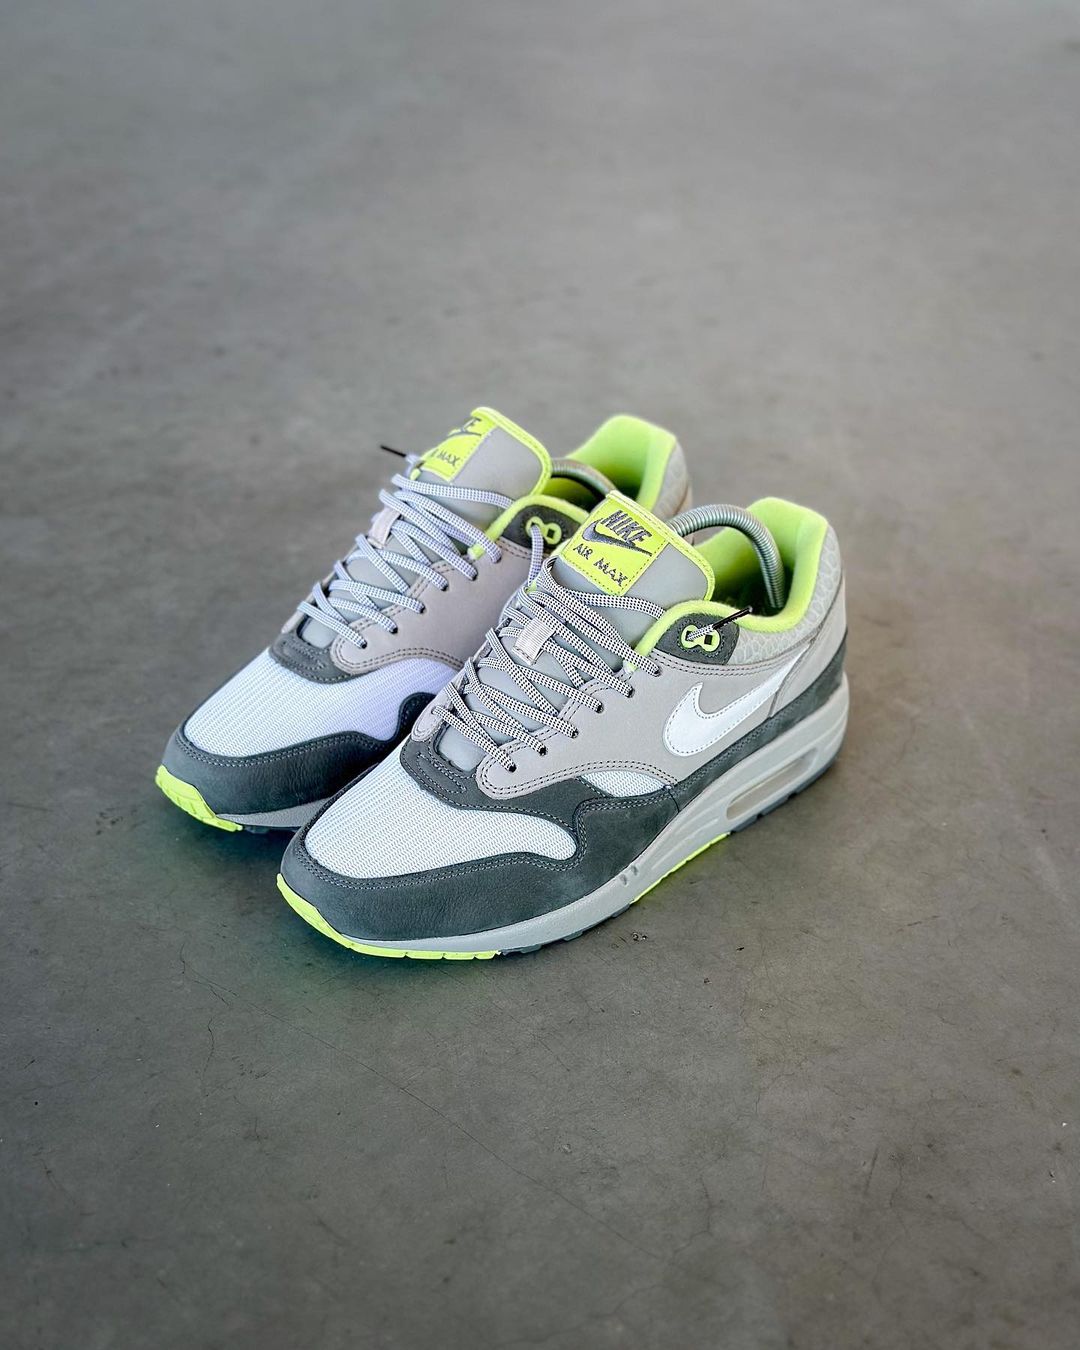 Nike Air Max 1 By You Dave White @shitsmint